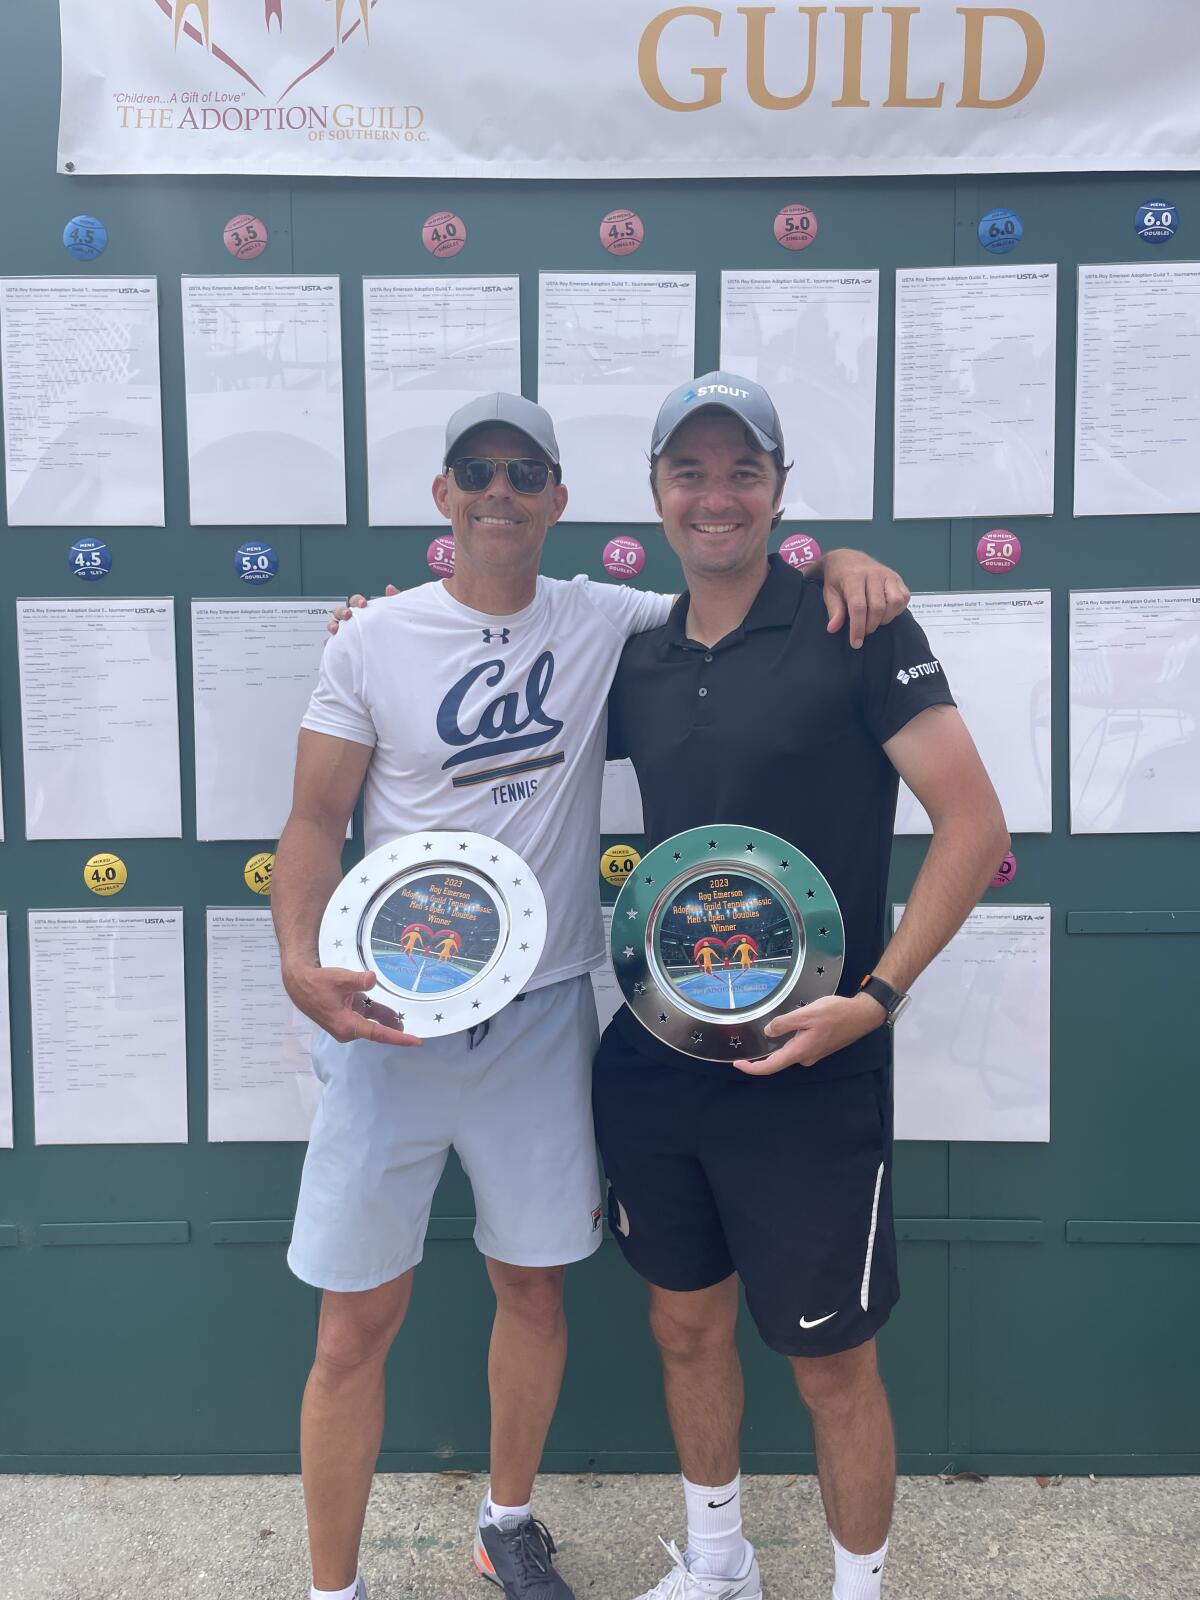 Carsten Hoffmann and Jayson Amos won the men's open doubles title at the Adoption Guild tournament.